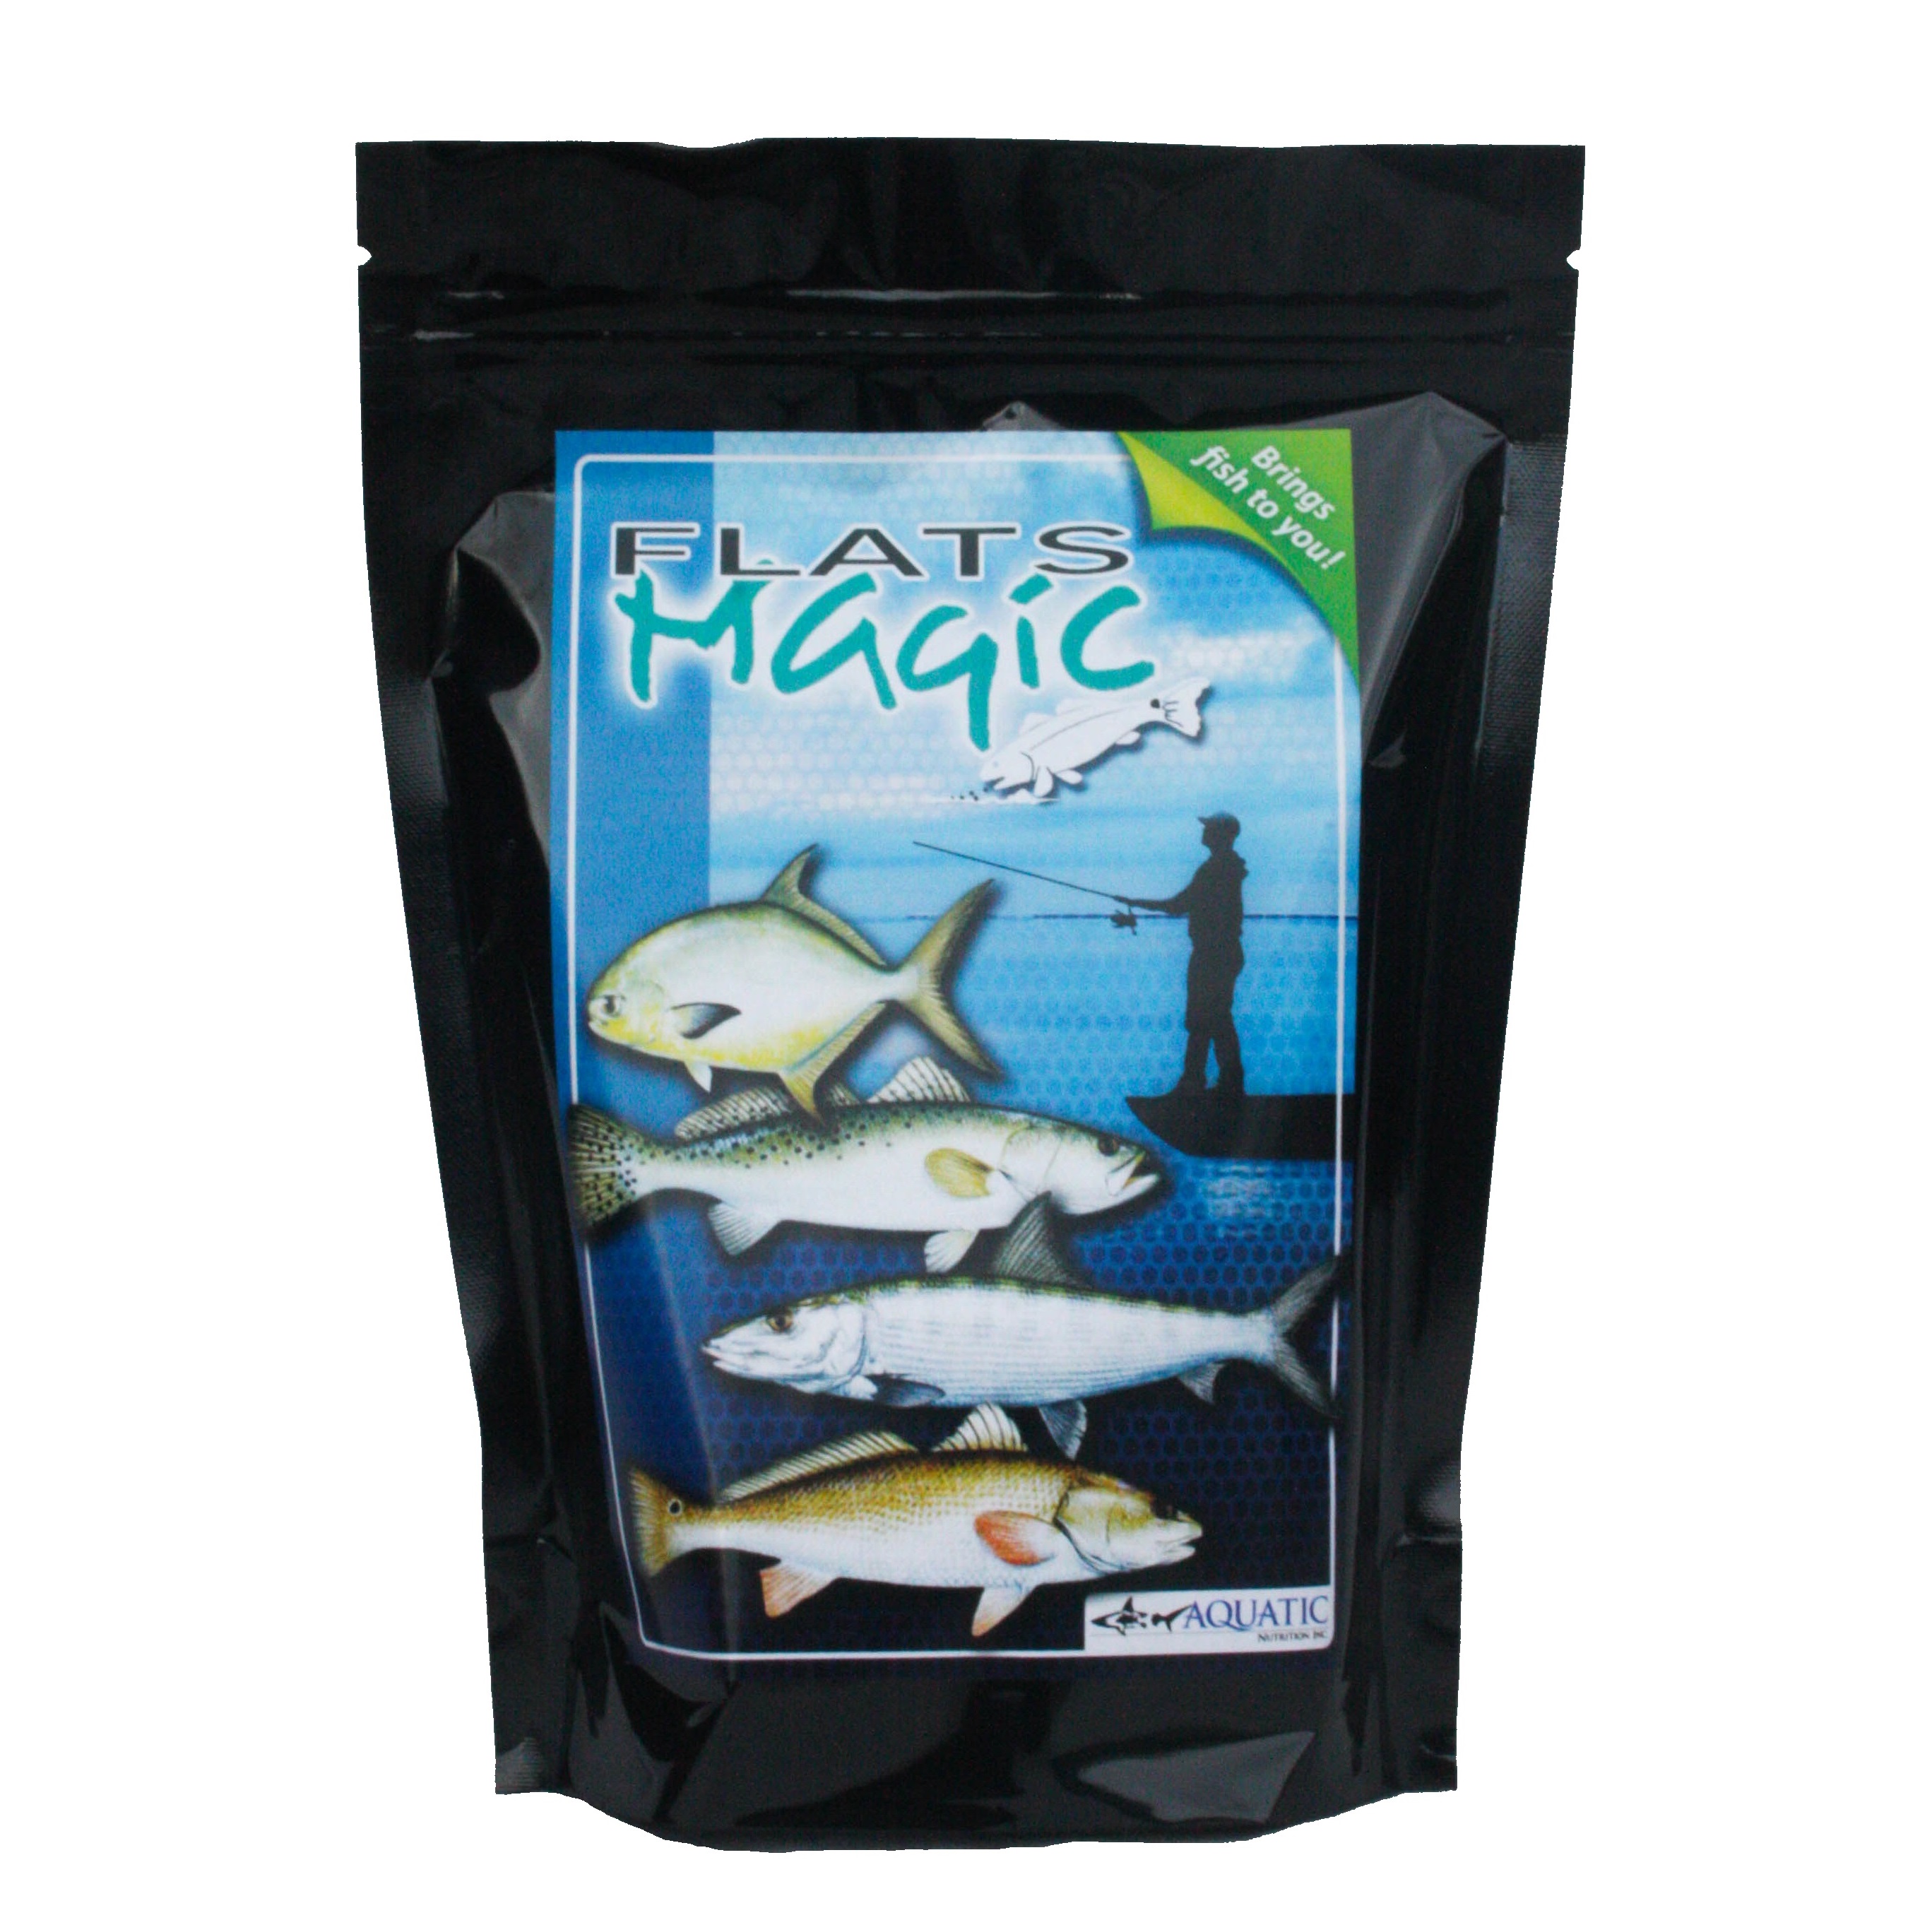 Flats Magic Create Your Flats Fishing Success with Flats Magic Chum! [Flats  Magic] - $16.99 : Aquatic Nutrition, Quality Aquatic Diets and Fishing  Products by Fish Experts